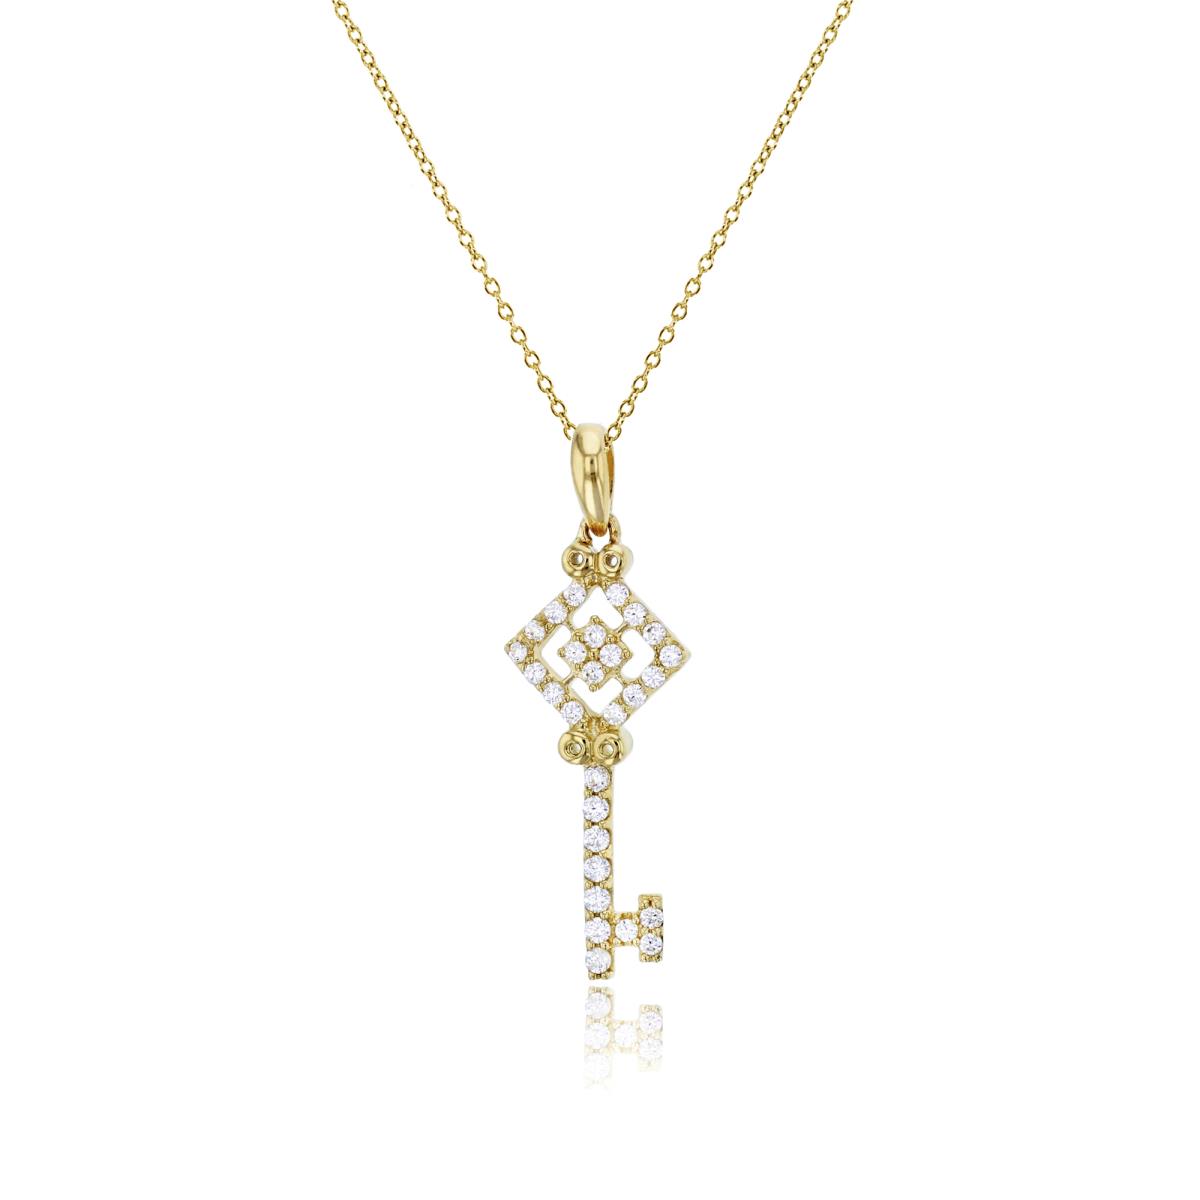 14K Yellow Gold Micropave 28x9mm Key Dangling 18" Necklace